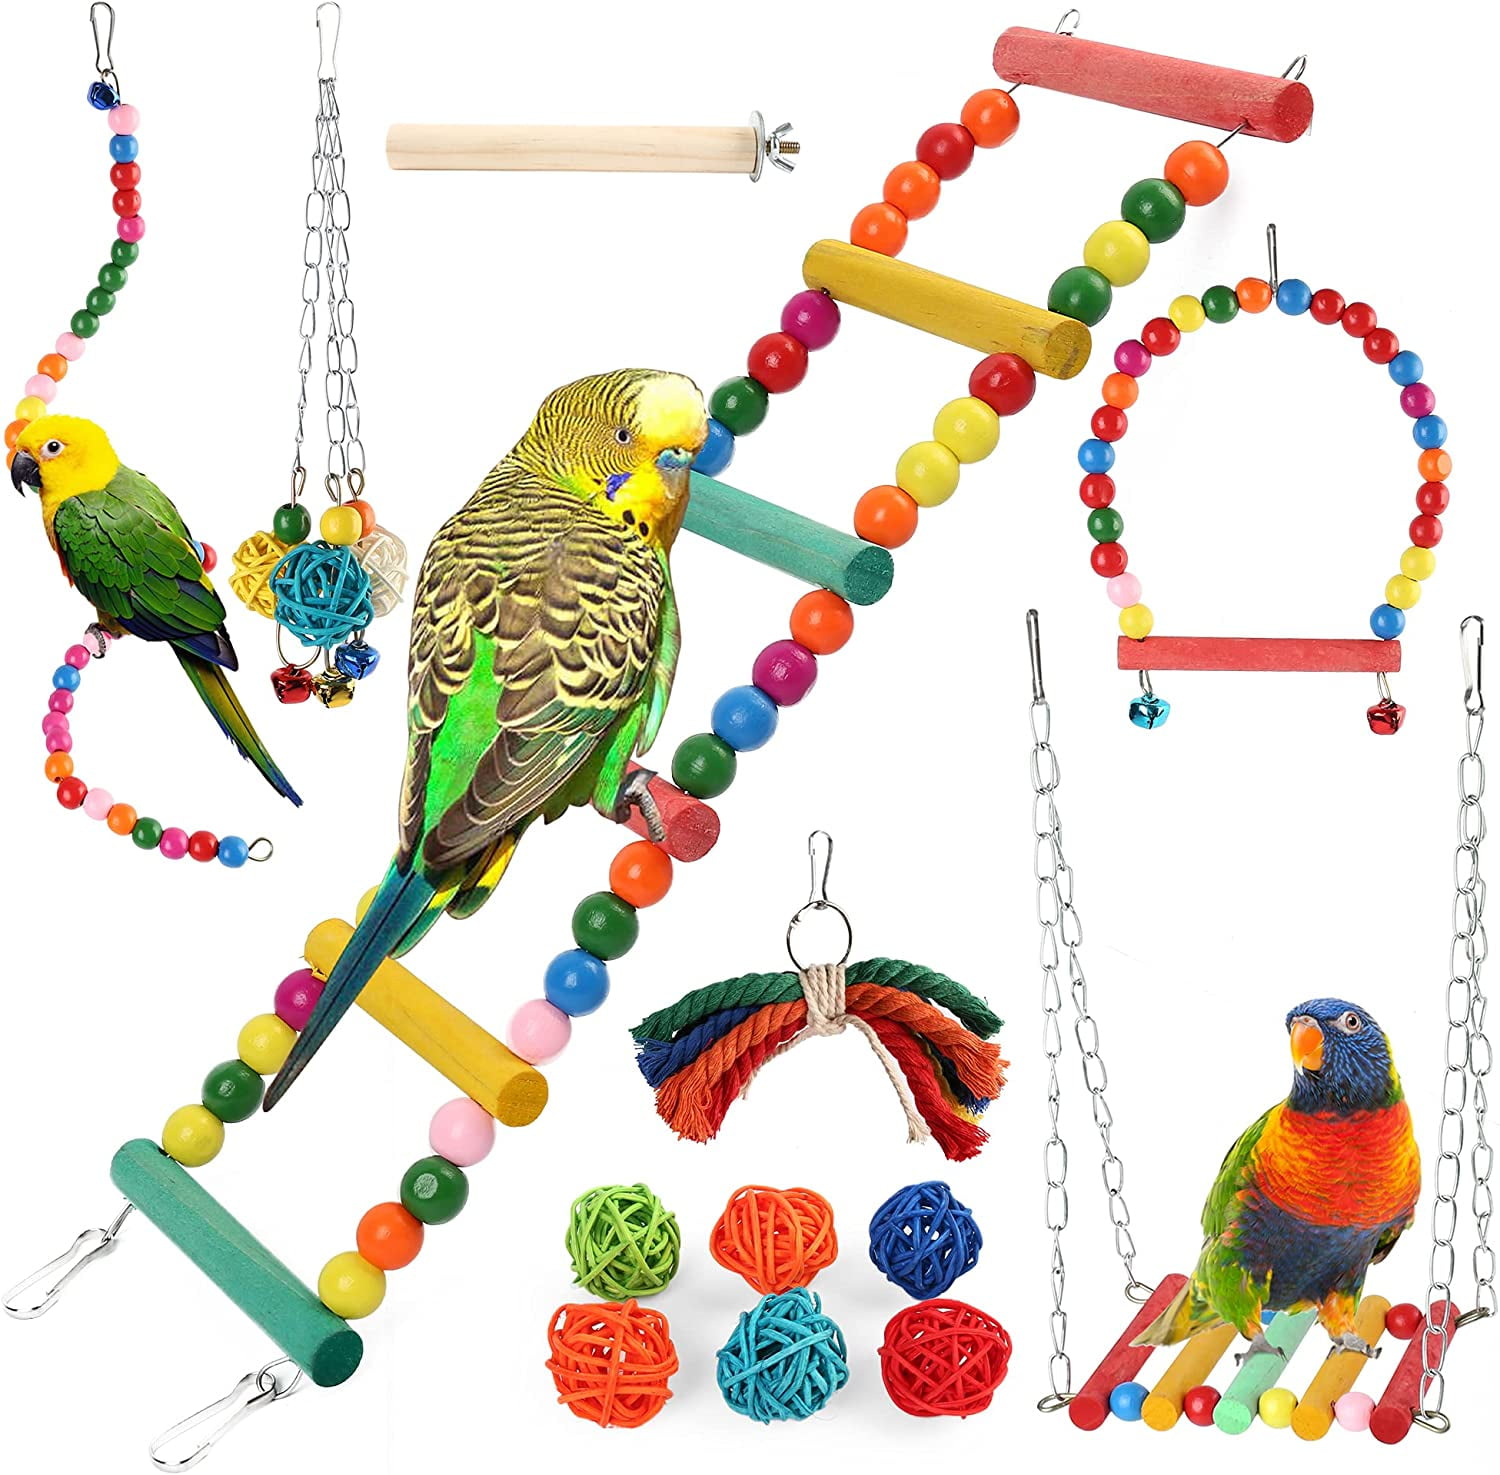 Dropship 40*40cm Parrot Climbing Net Bird Toy Swing Rope Net Bird Stand Net  Hammock With Hook Bird Hanging Climbing Chewing Biting Toys to Sell Online  at a Lower Price